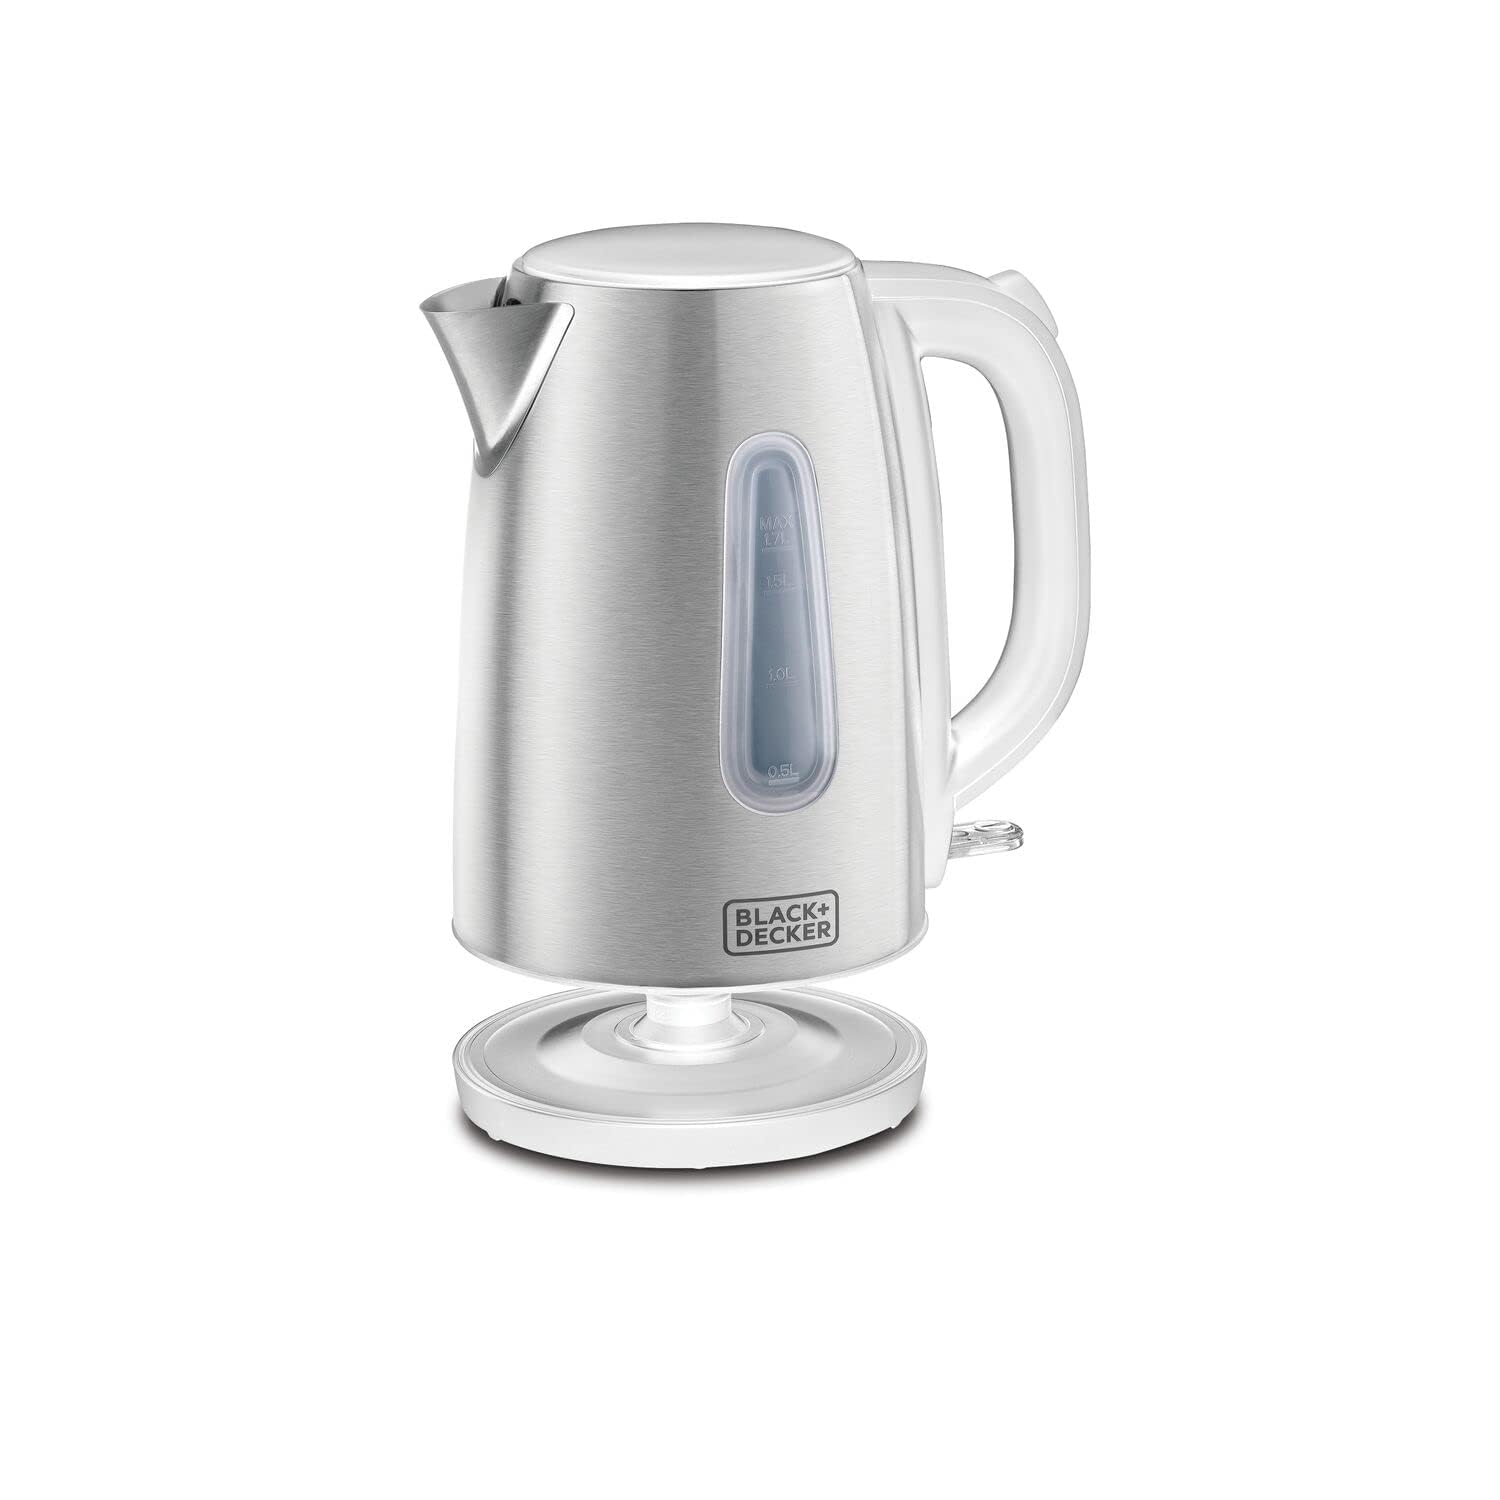 Black & Decker 2200W 1.7L Cordless Electric Kettle With Water-Level Indicator, Removable Filter